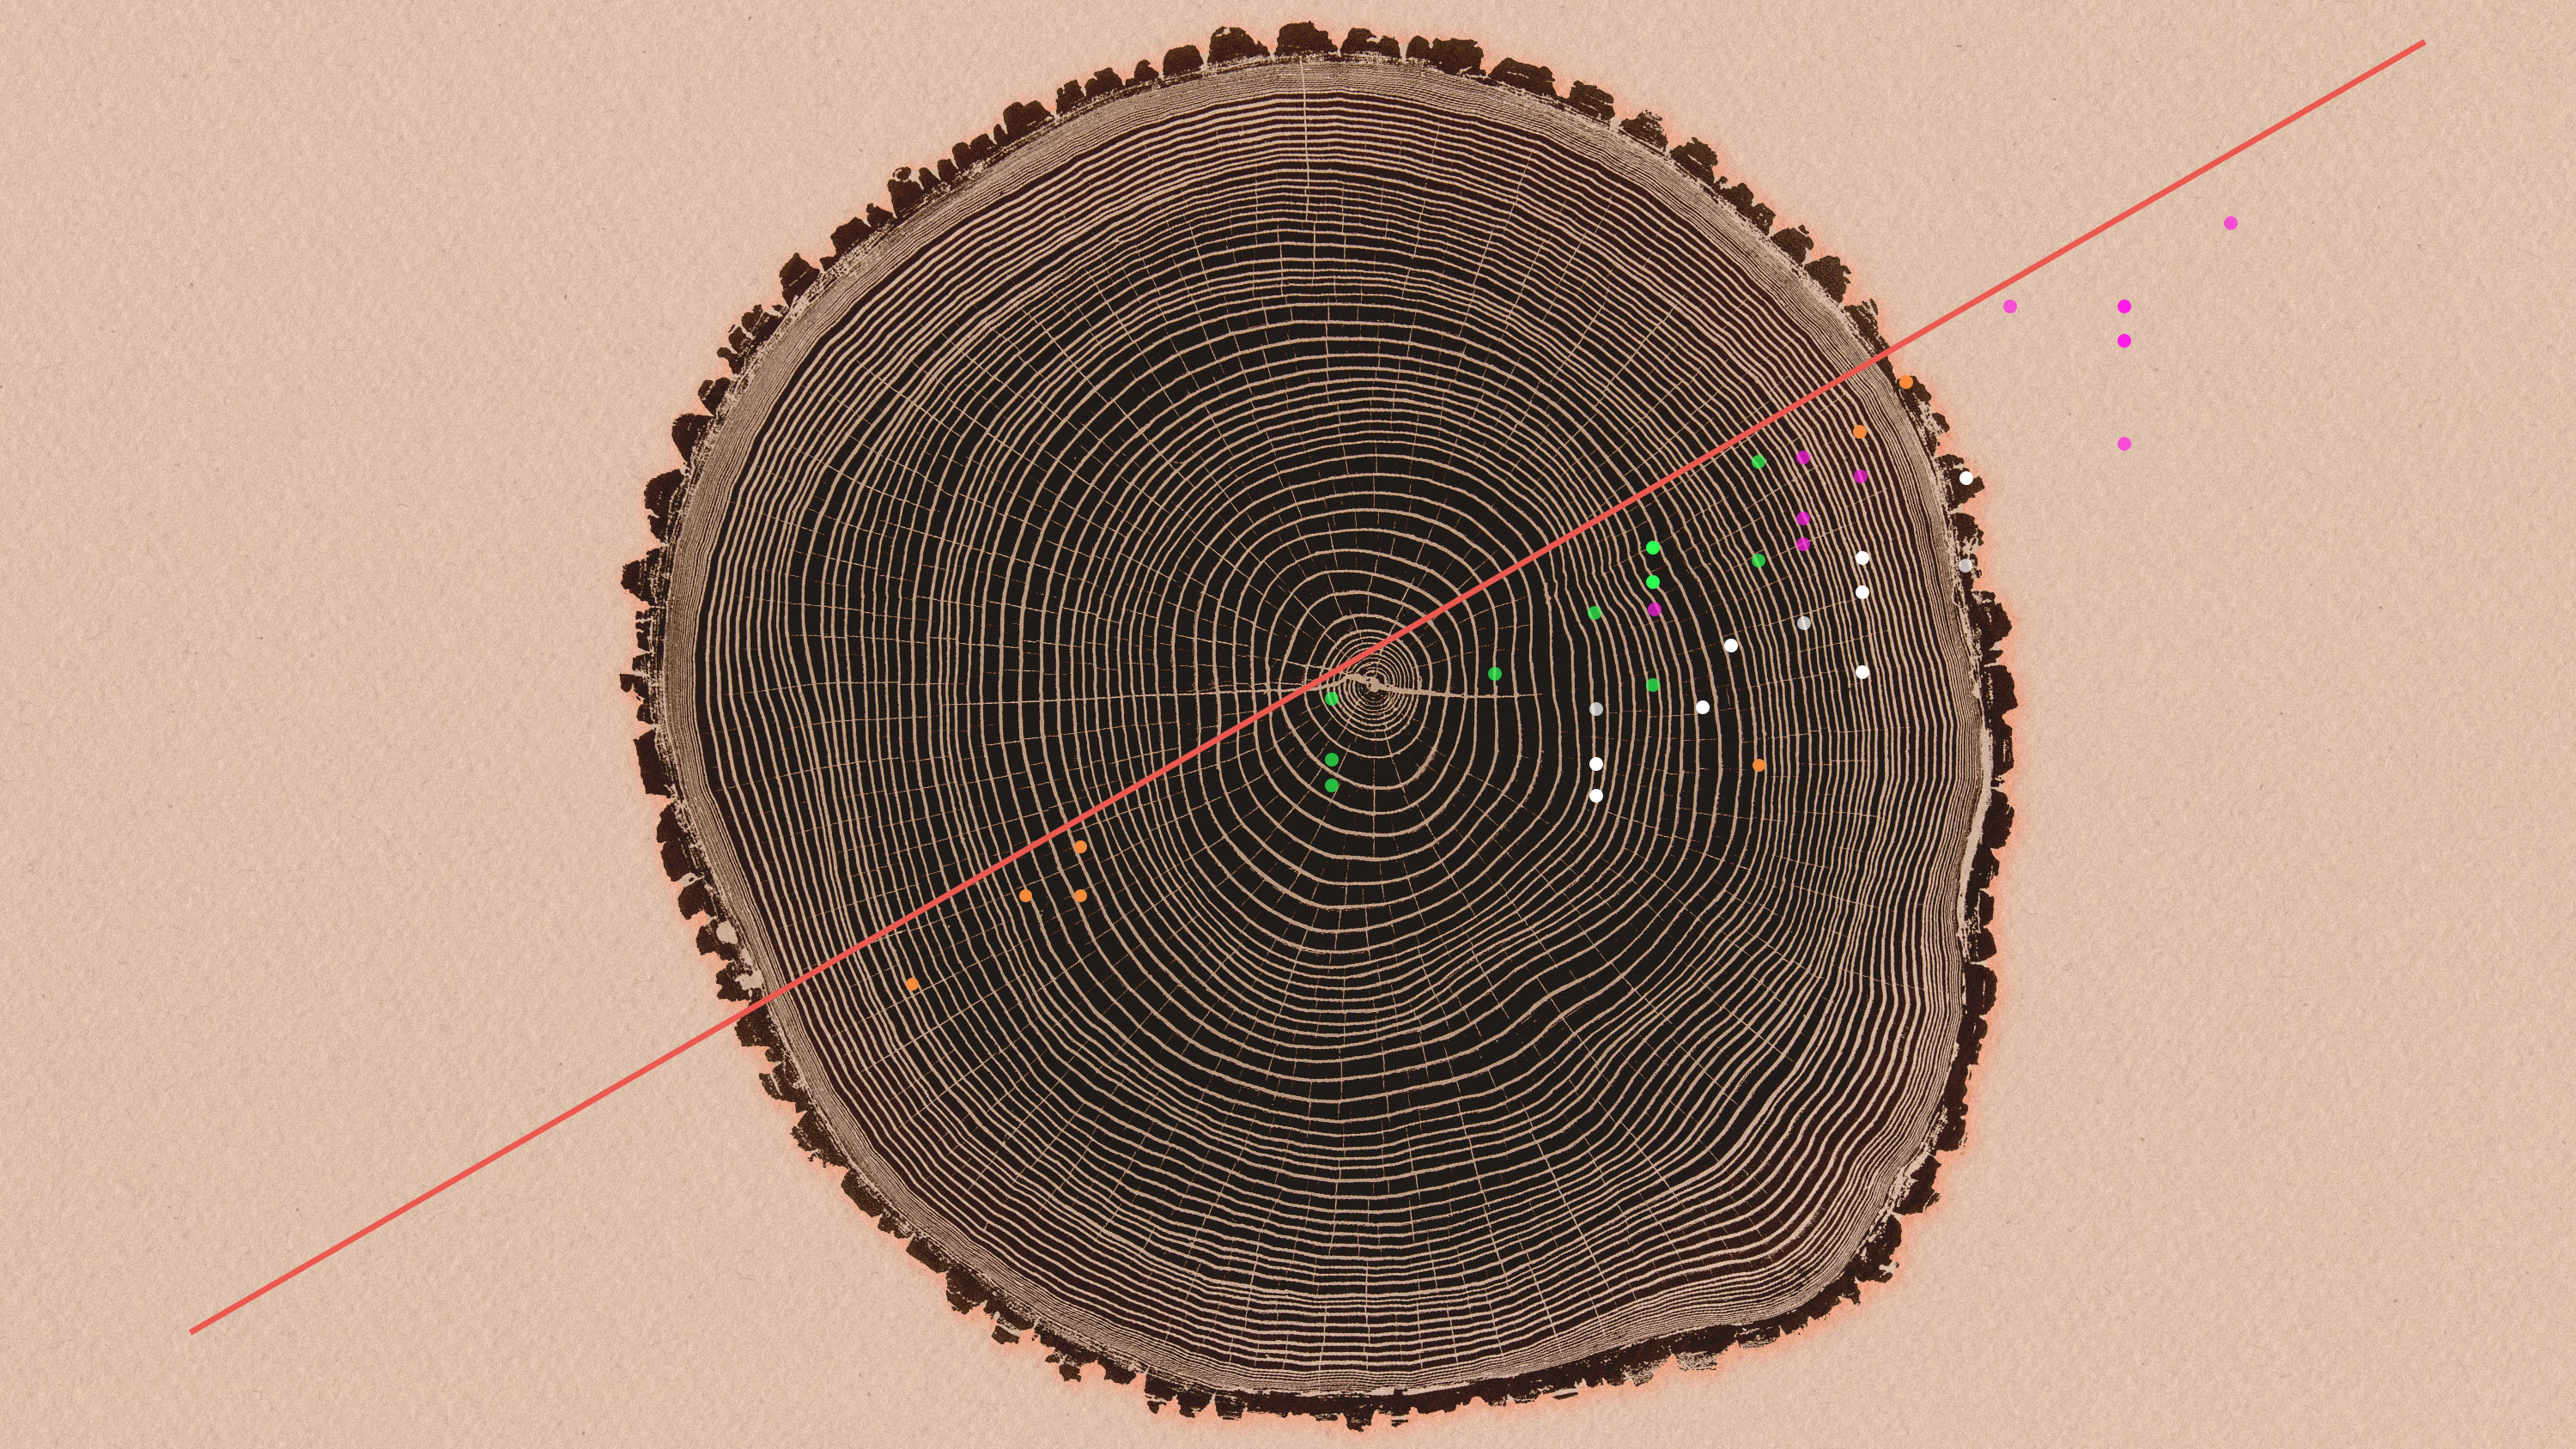 illustration of tree rings with line scatter plot over them